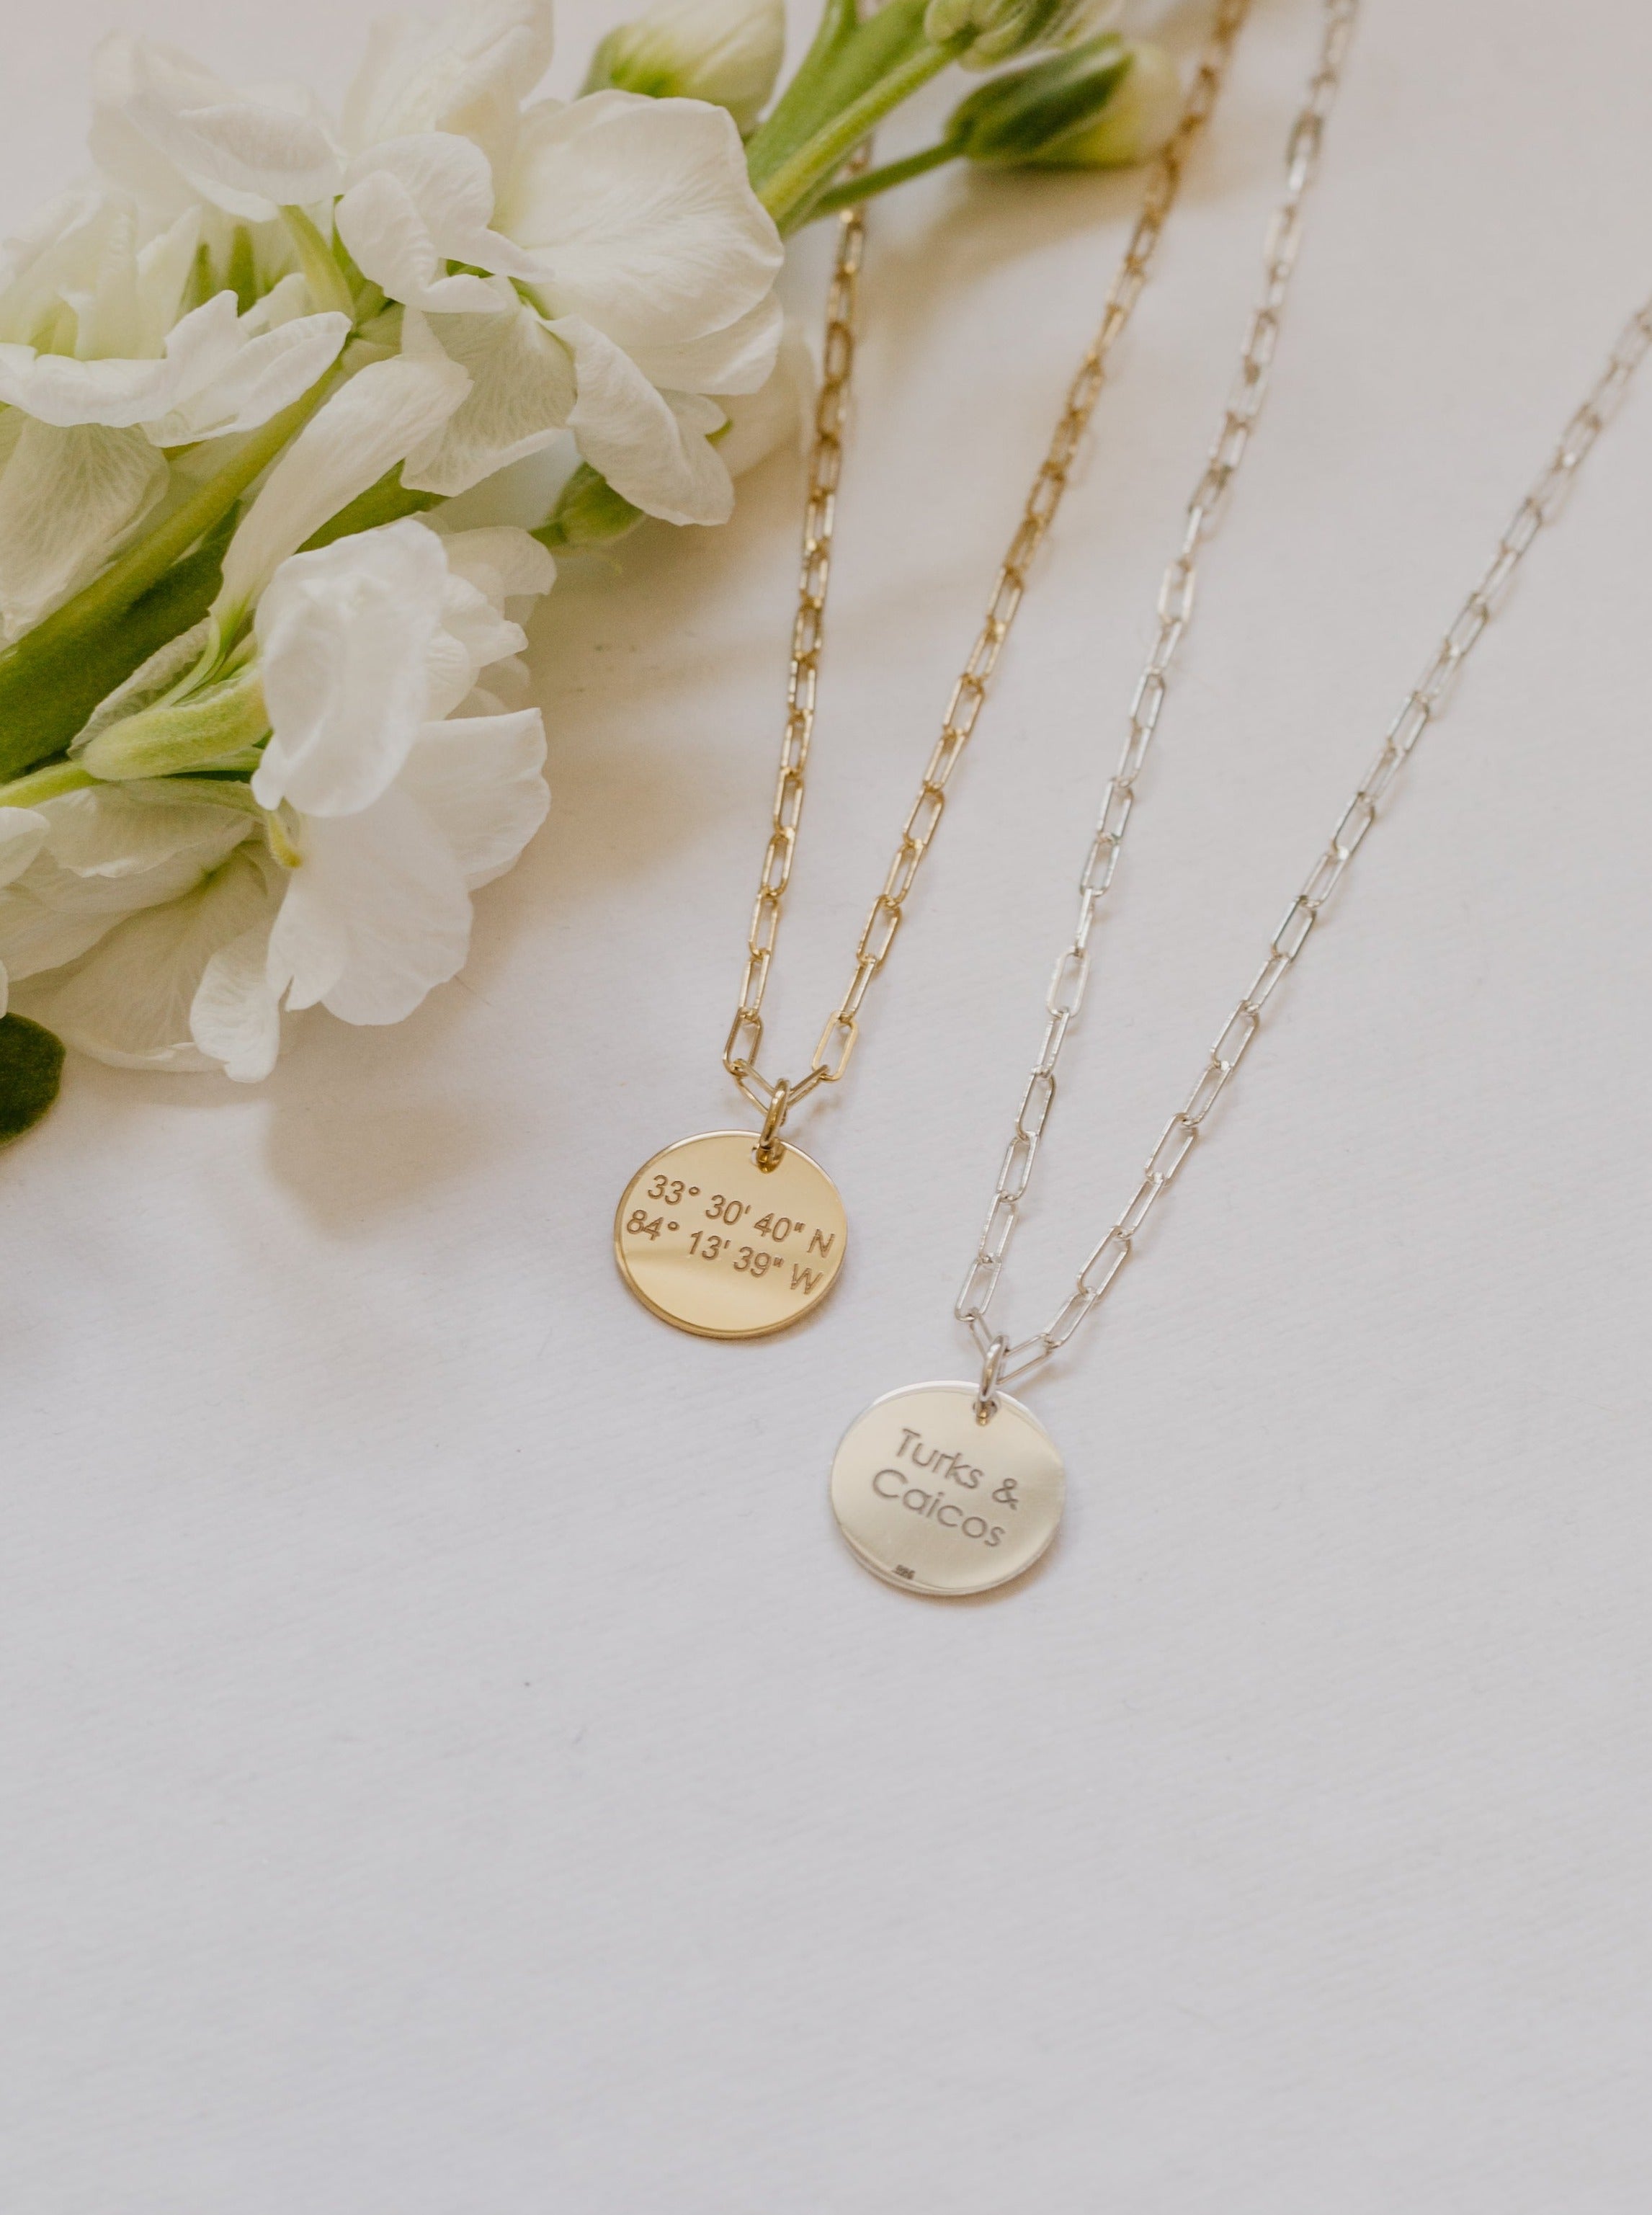 personalized jewelry with coordinates and names